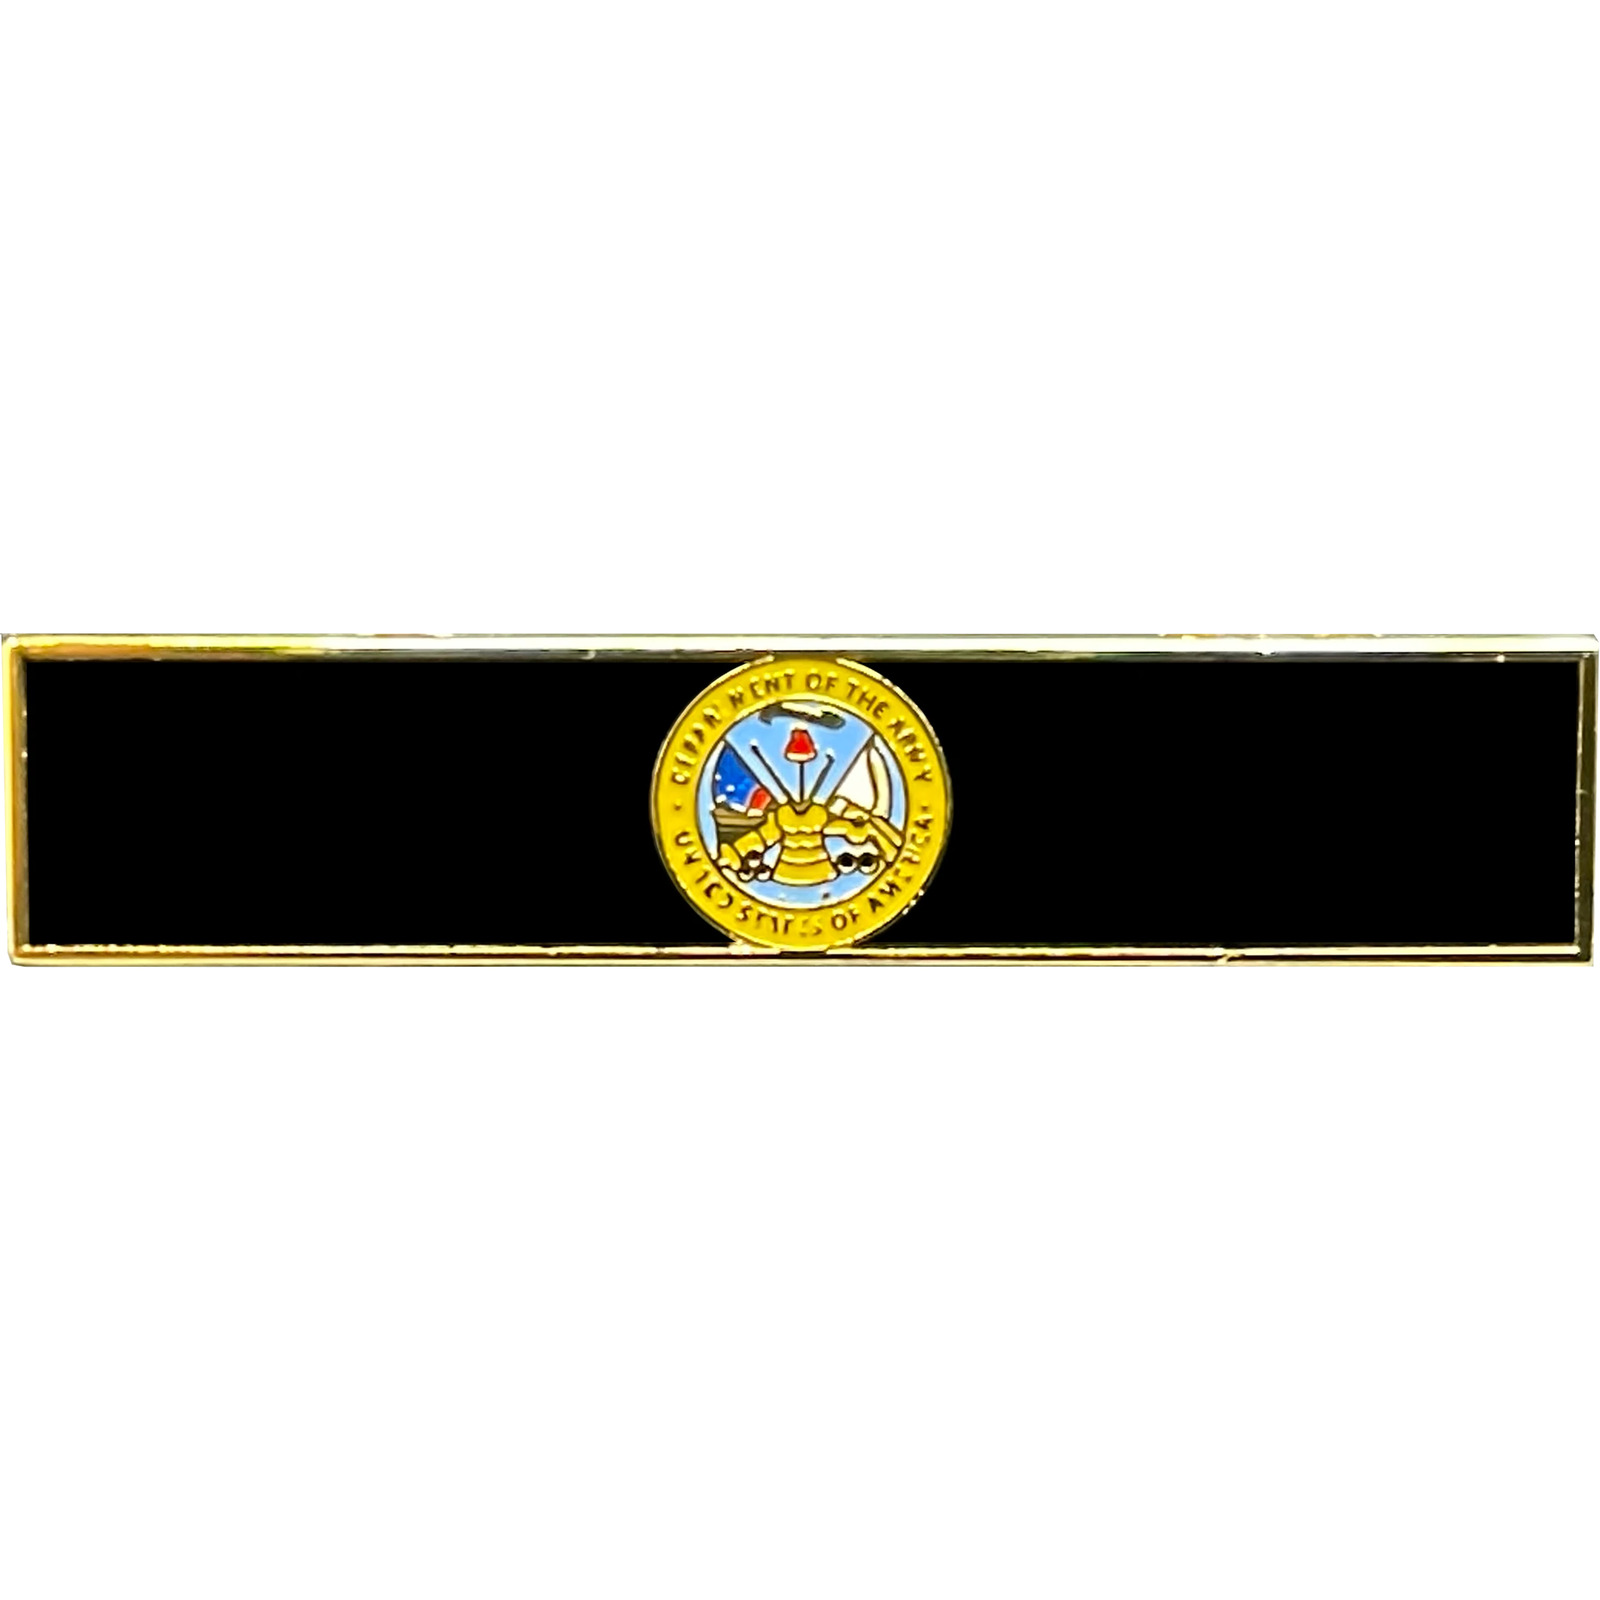 EL7-018 Army Military Service Citation Commendation Bar Pin Police CBP Field Ope